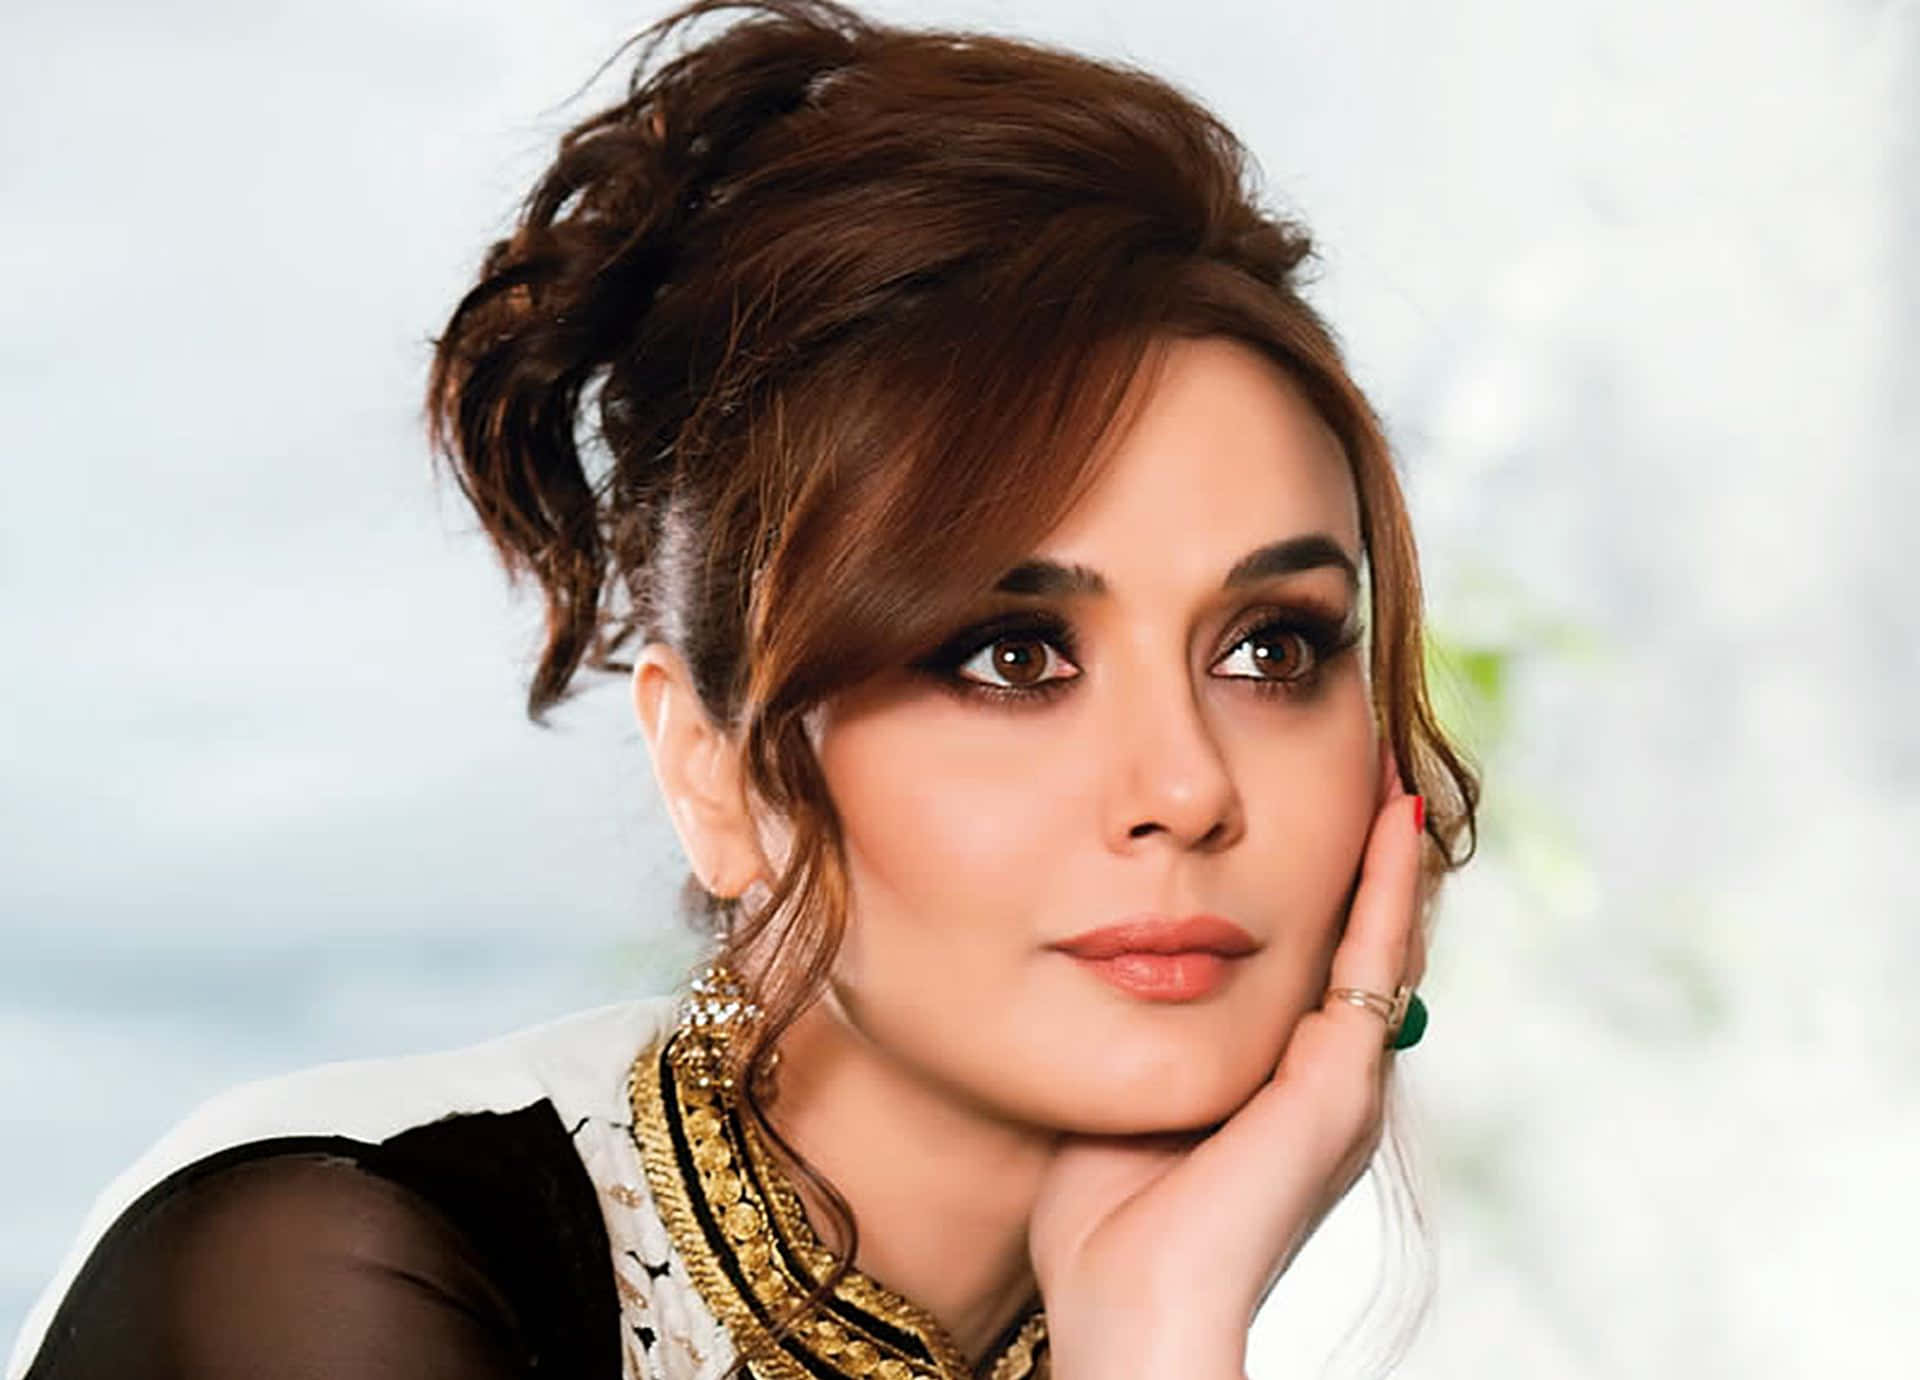 Preity Zinta is a successful actor captivating audiences with her performances. Wallpaper